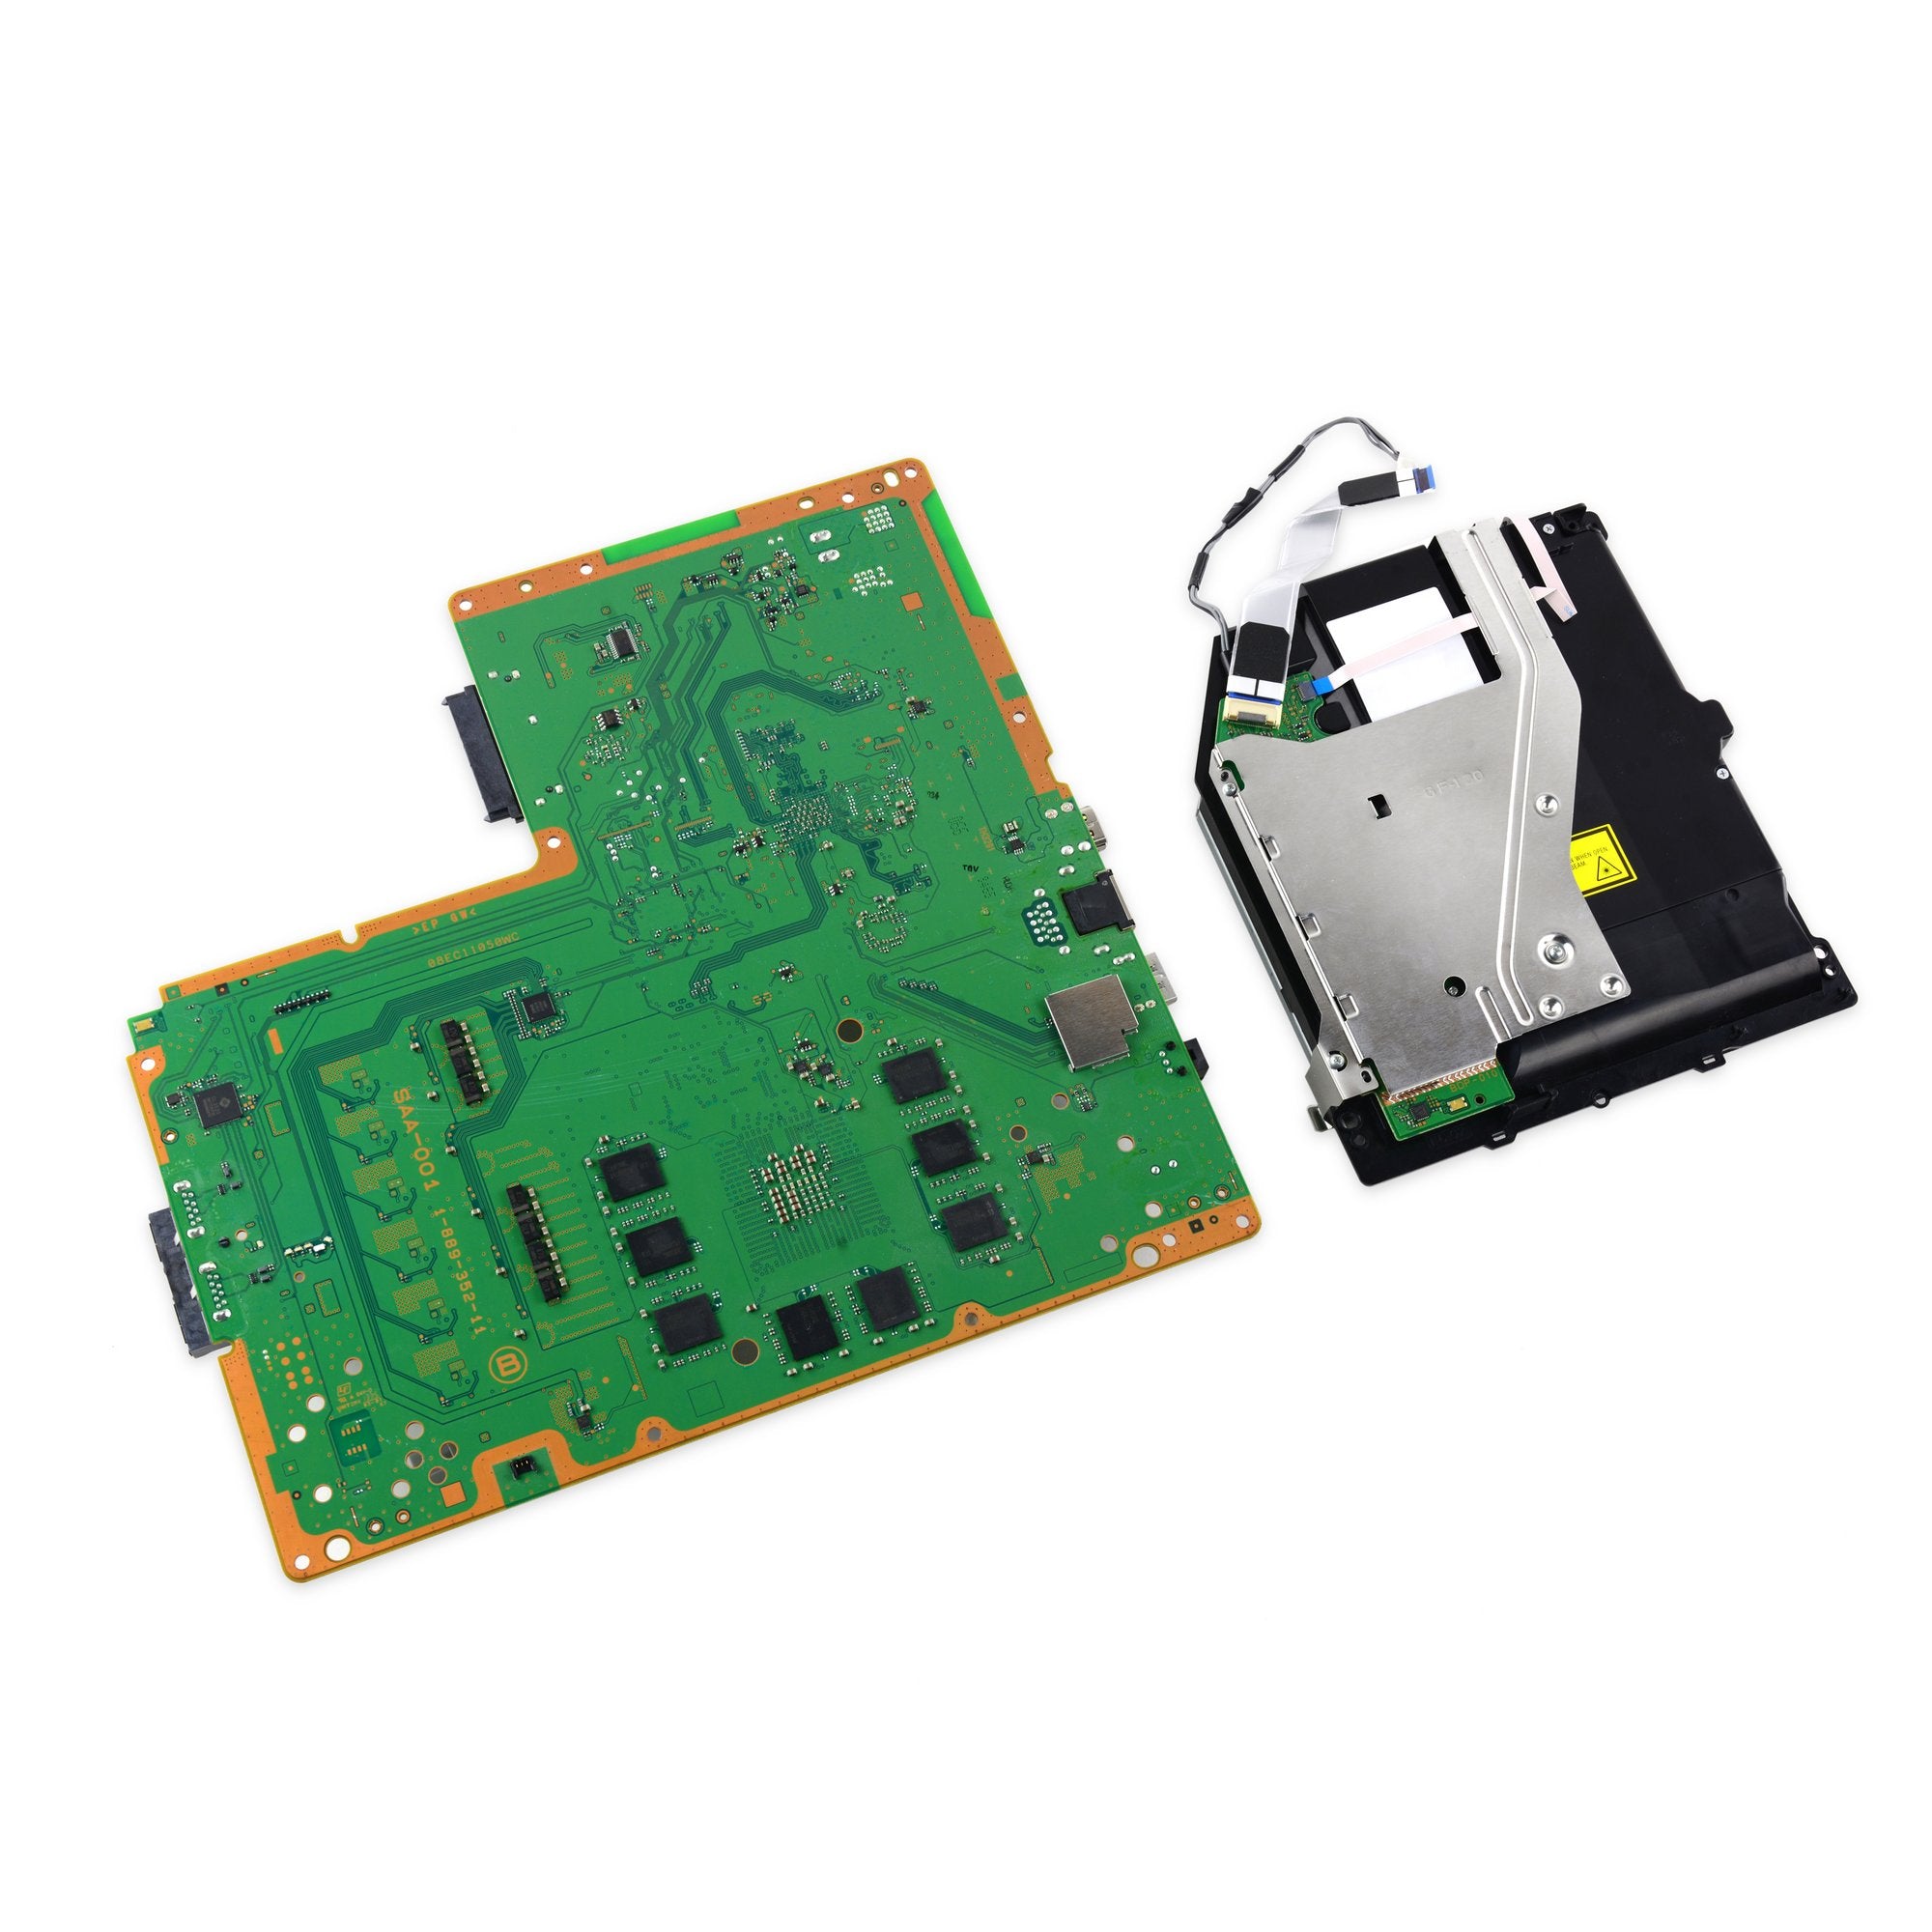 PlayStation 4 SAA-001 Motherboard & Paired Optical Drive